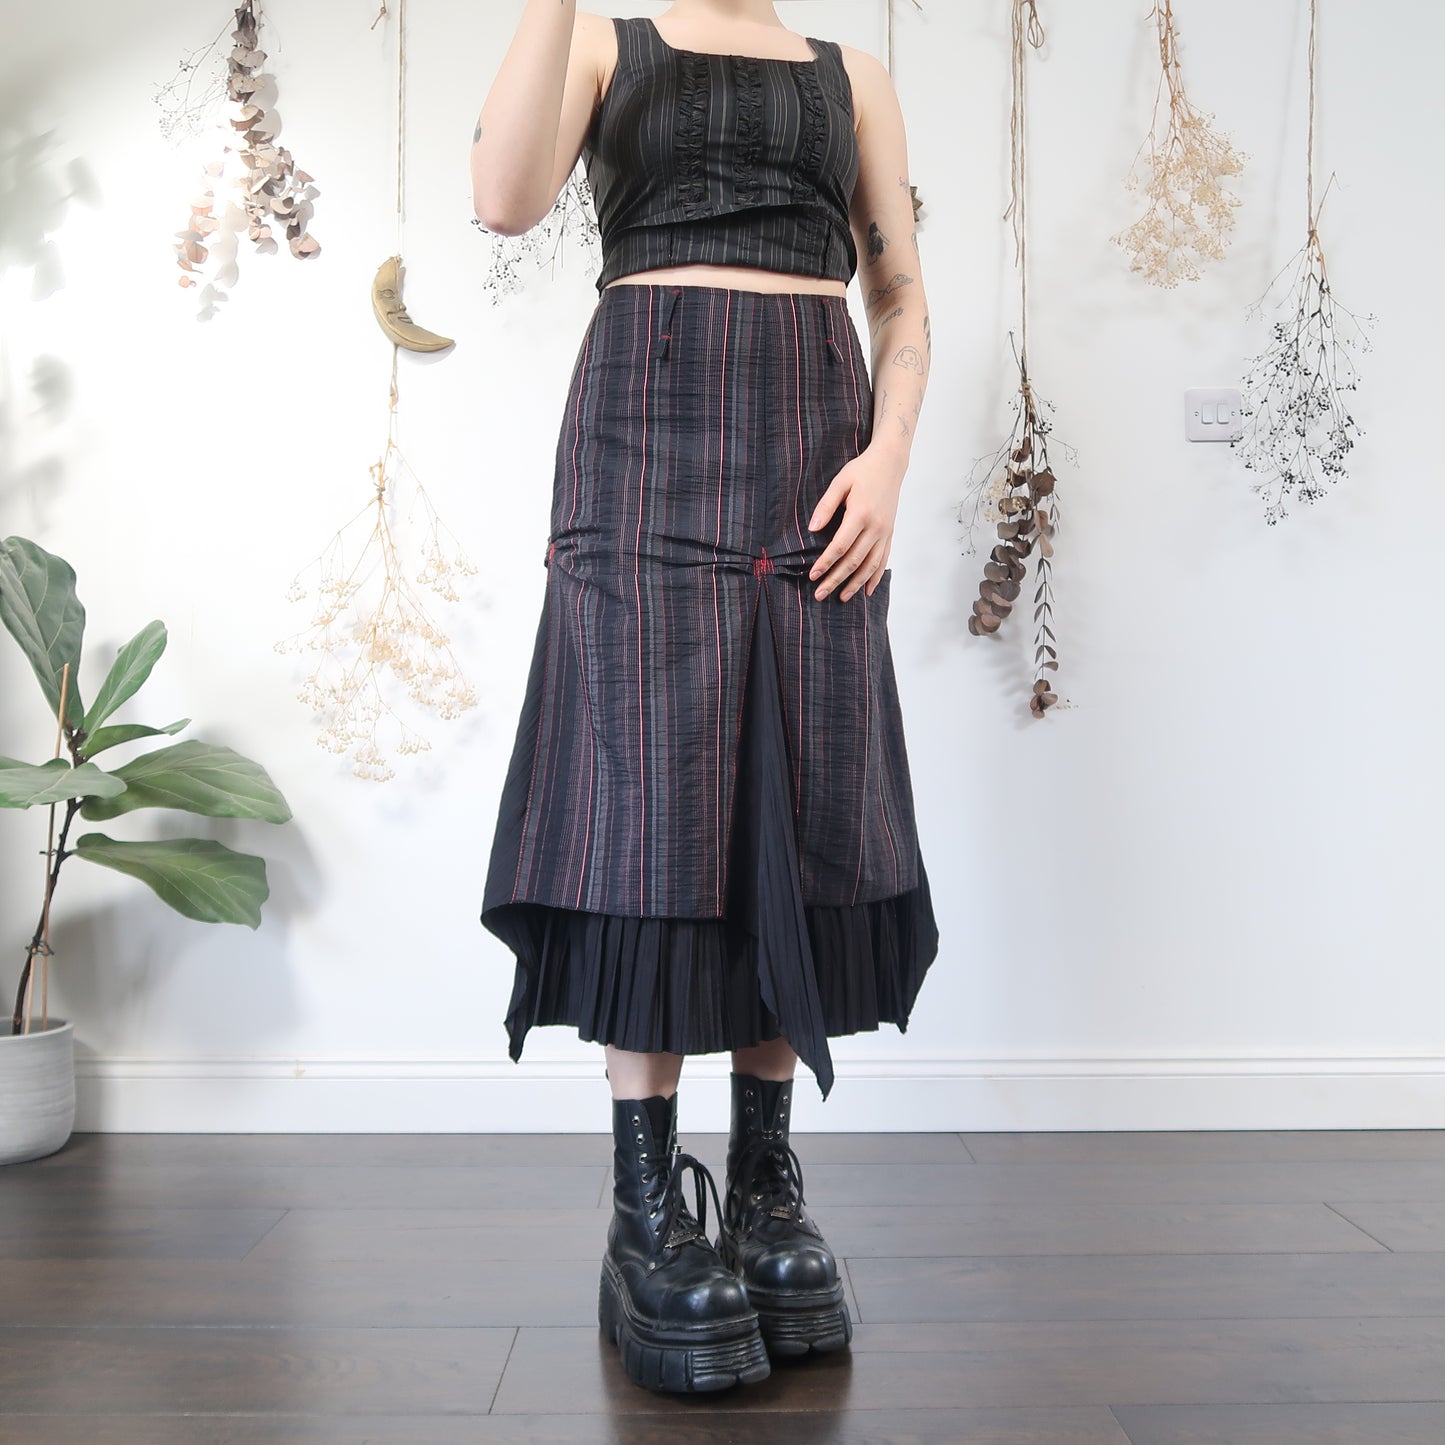 Pinstripe archive skirt - size M